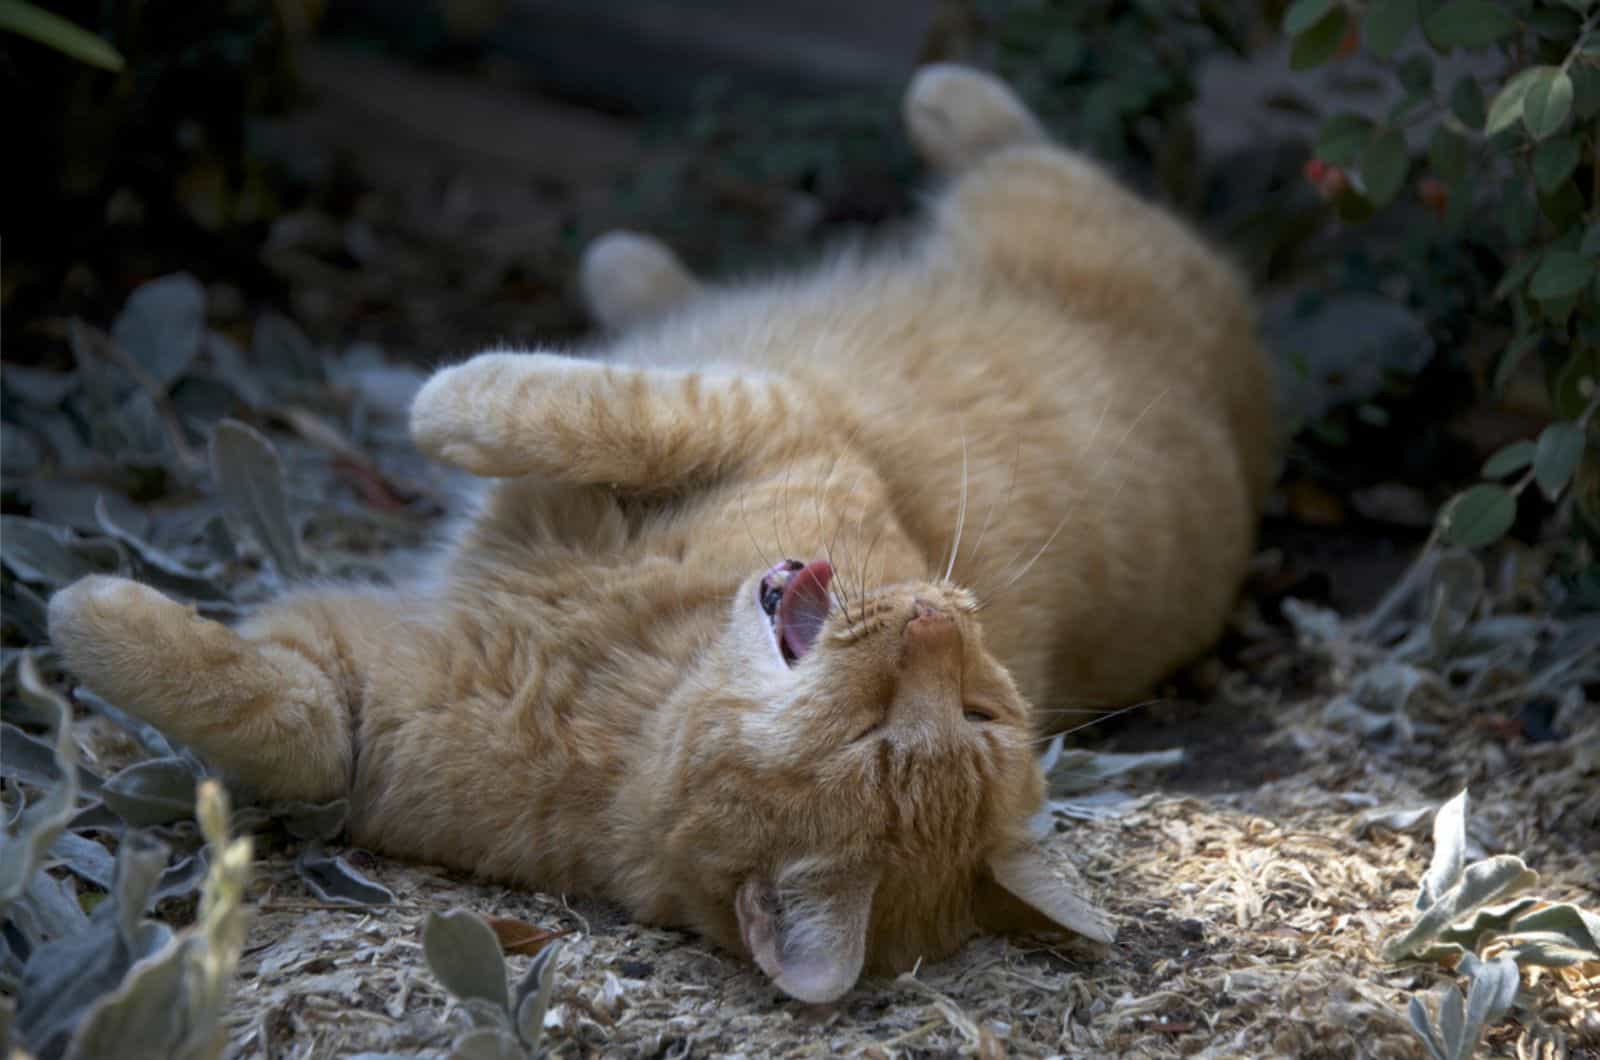 Domesticated orange tabby cat rolling around in the dirt